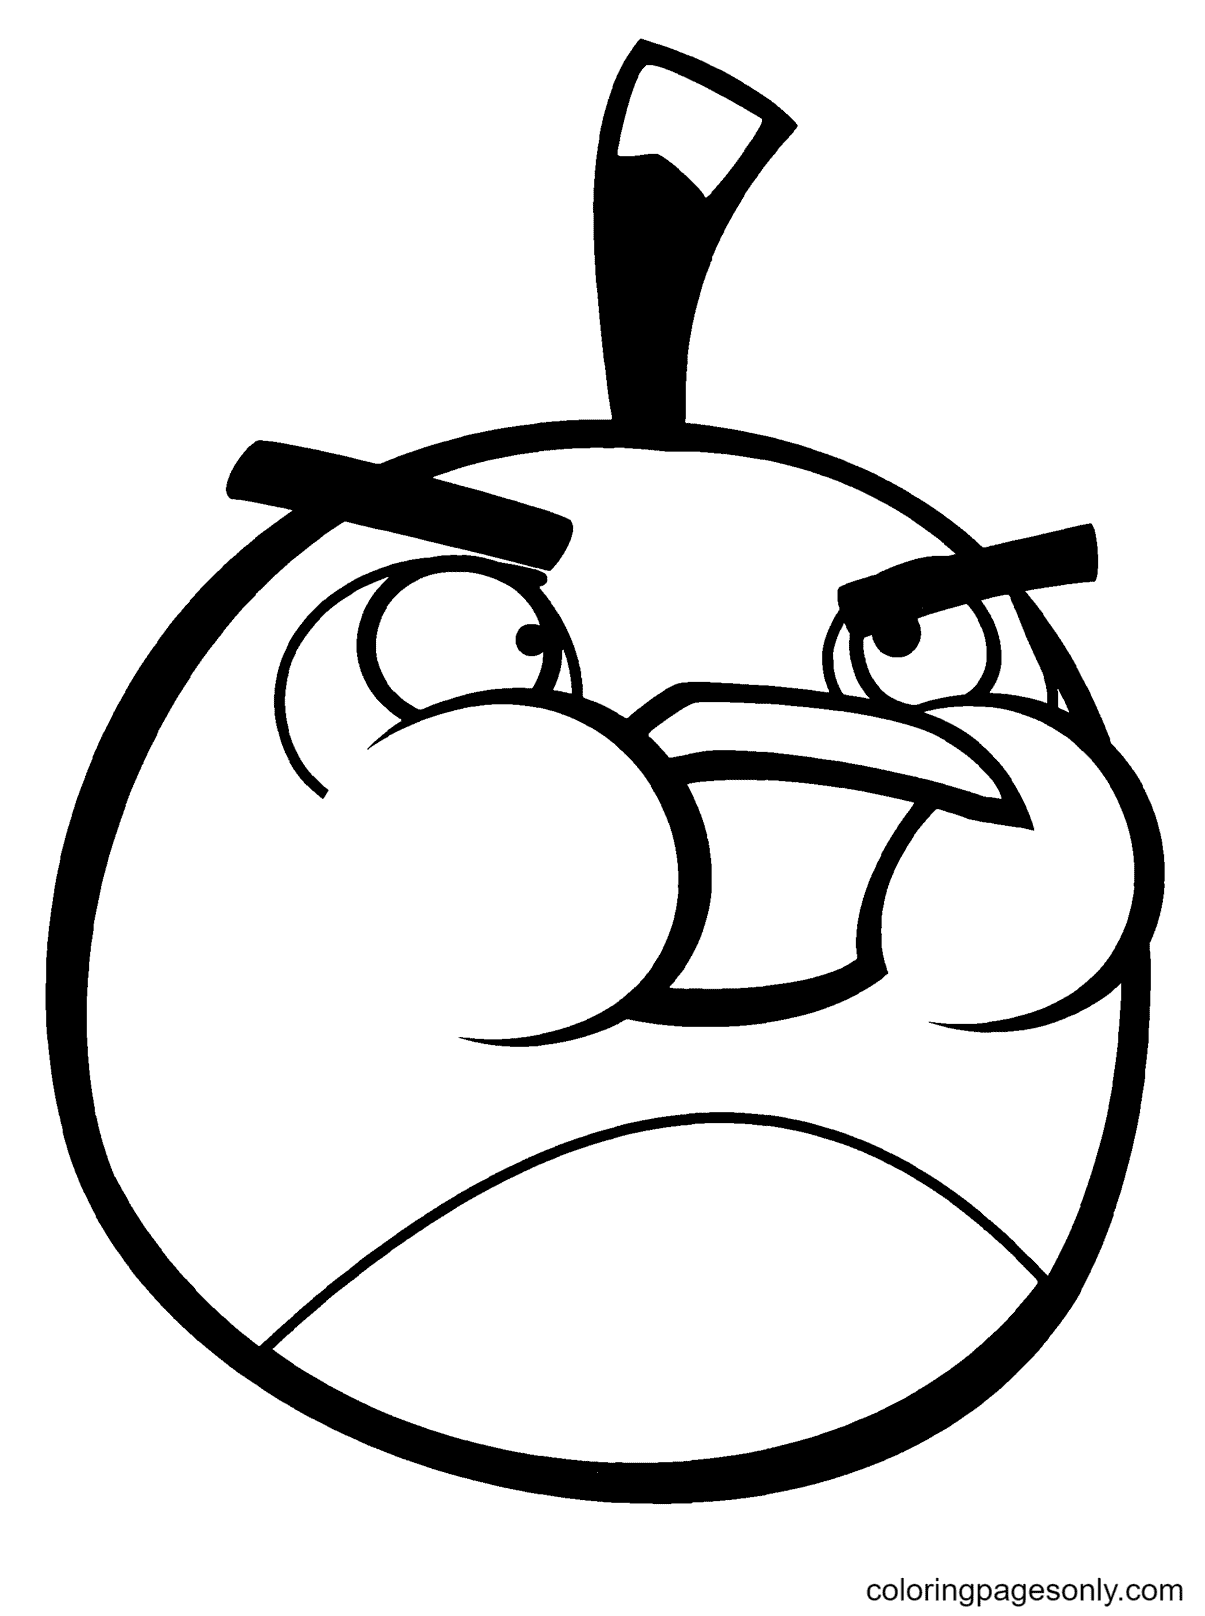 Bomb, the Black Bird Coloring Page